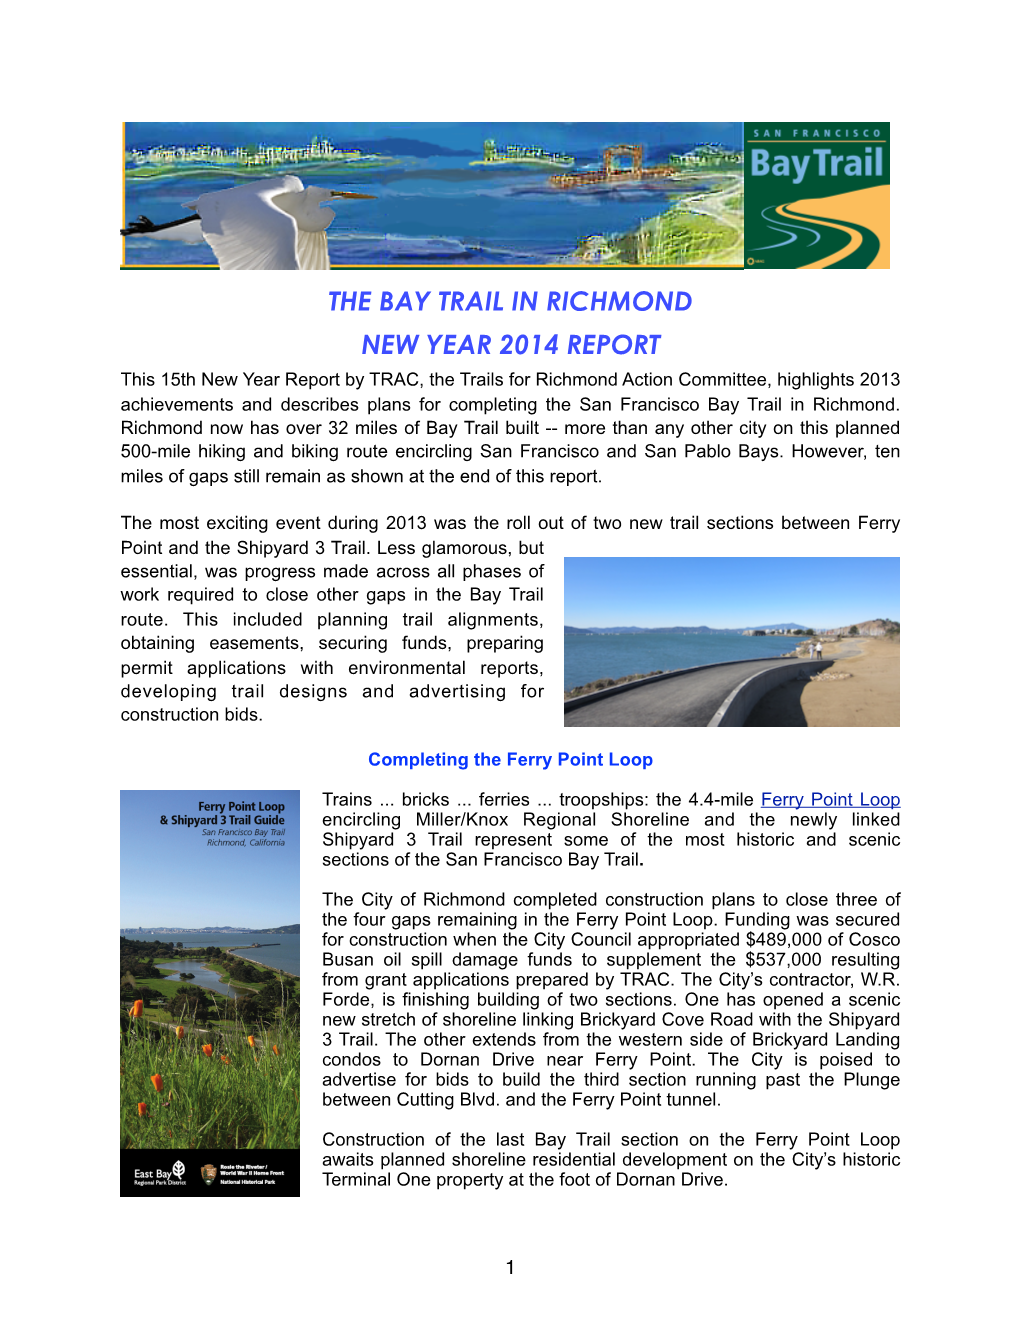 The Bay Trail in Richmond New Year 2014 Report